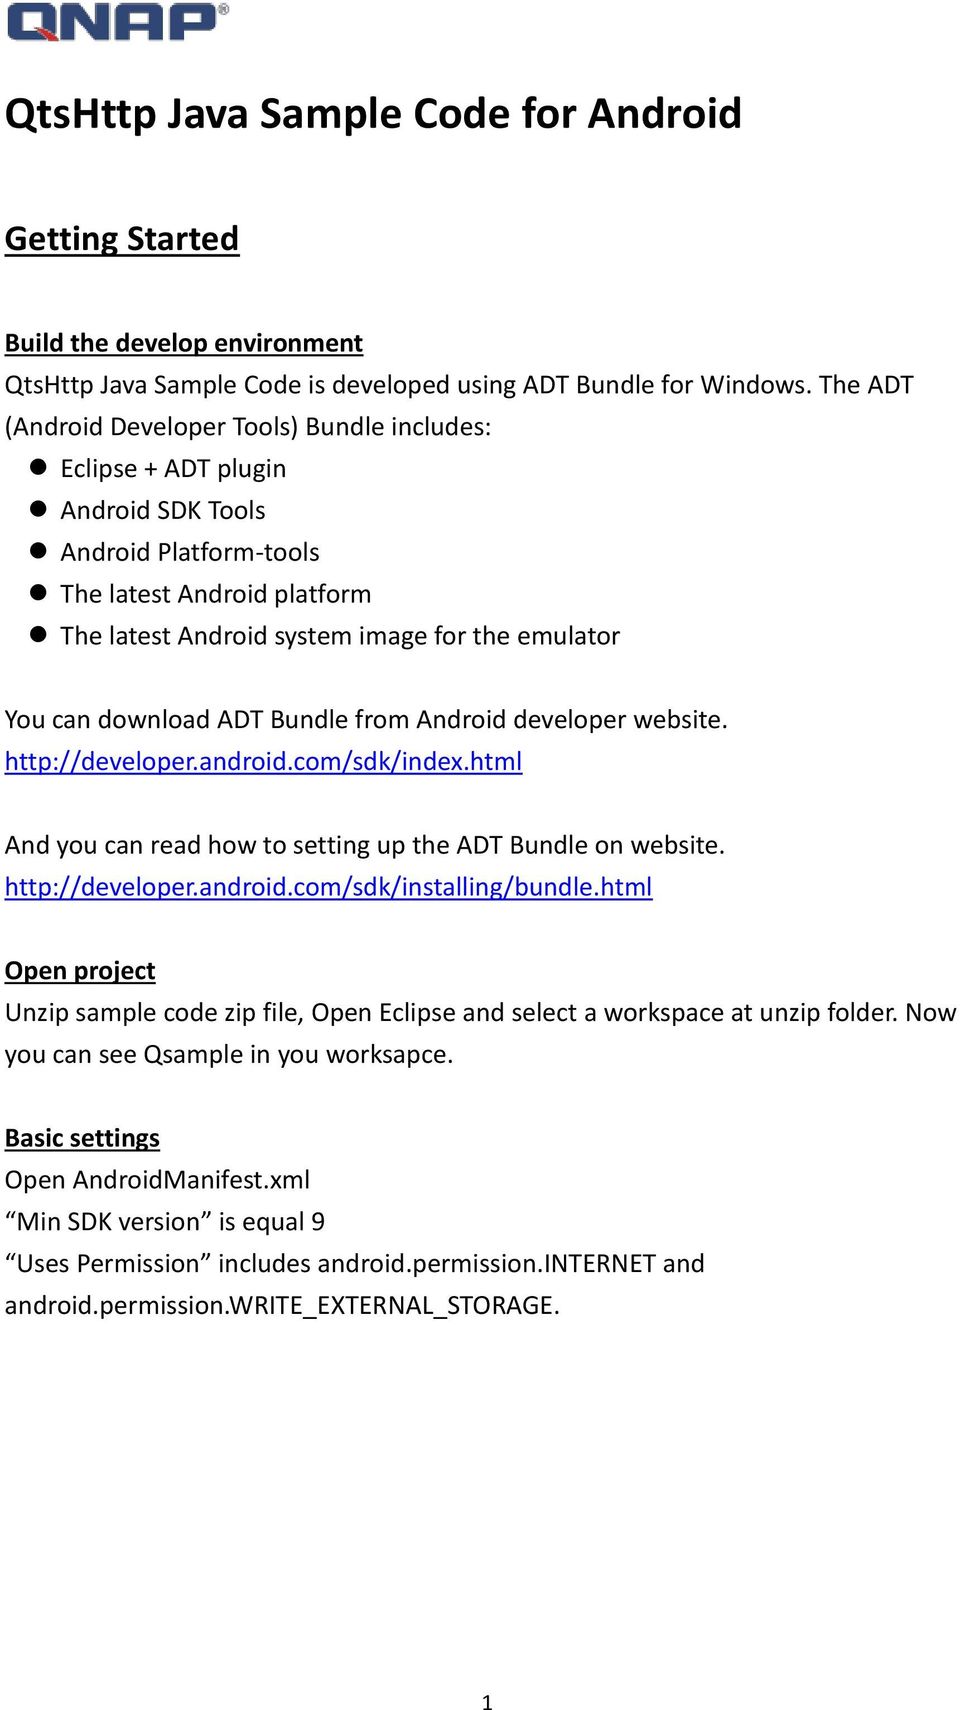 eclipse with adt bundle for mac